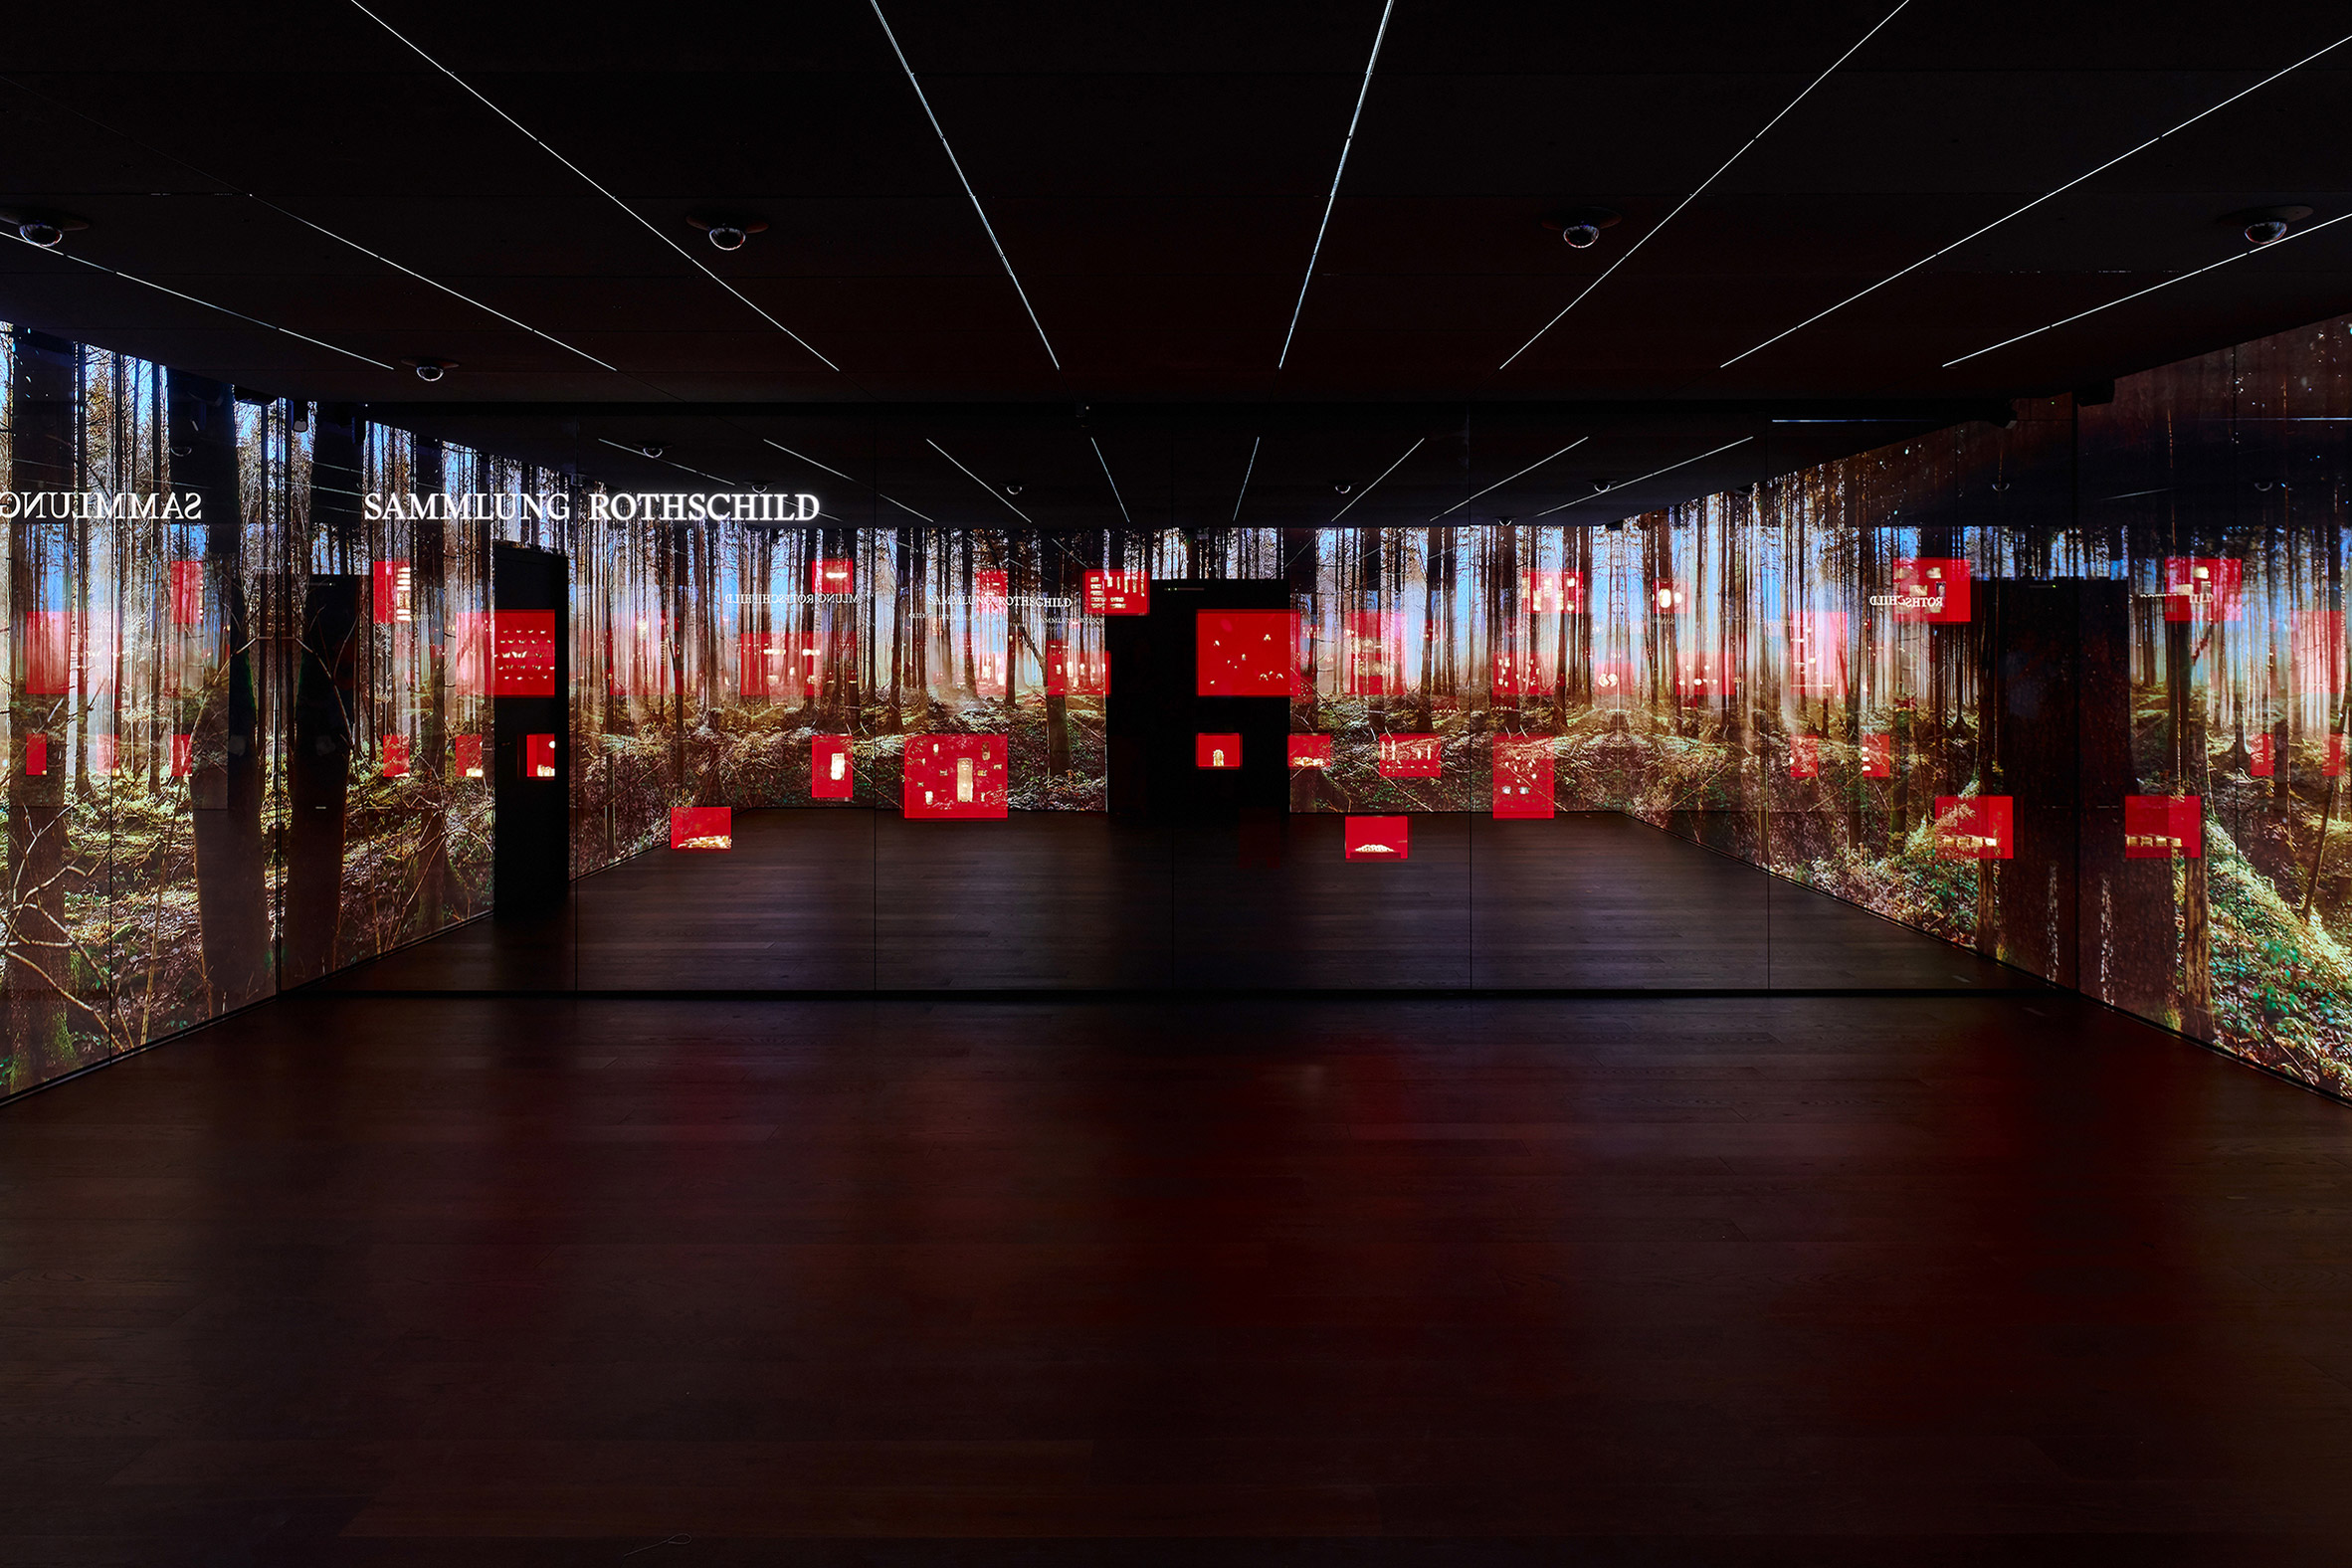 LED screens in The Rothschild Collection displayed by Pfarré Lighting Design at the Goldkammer Museum in Frankfurt